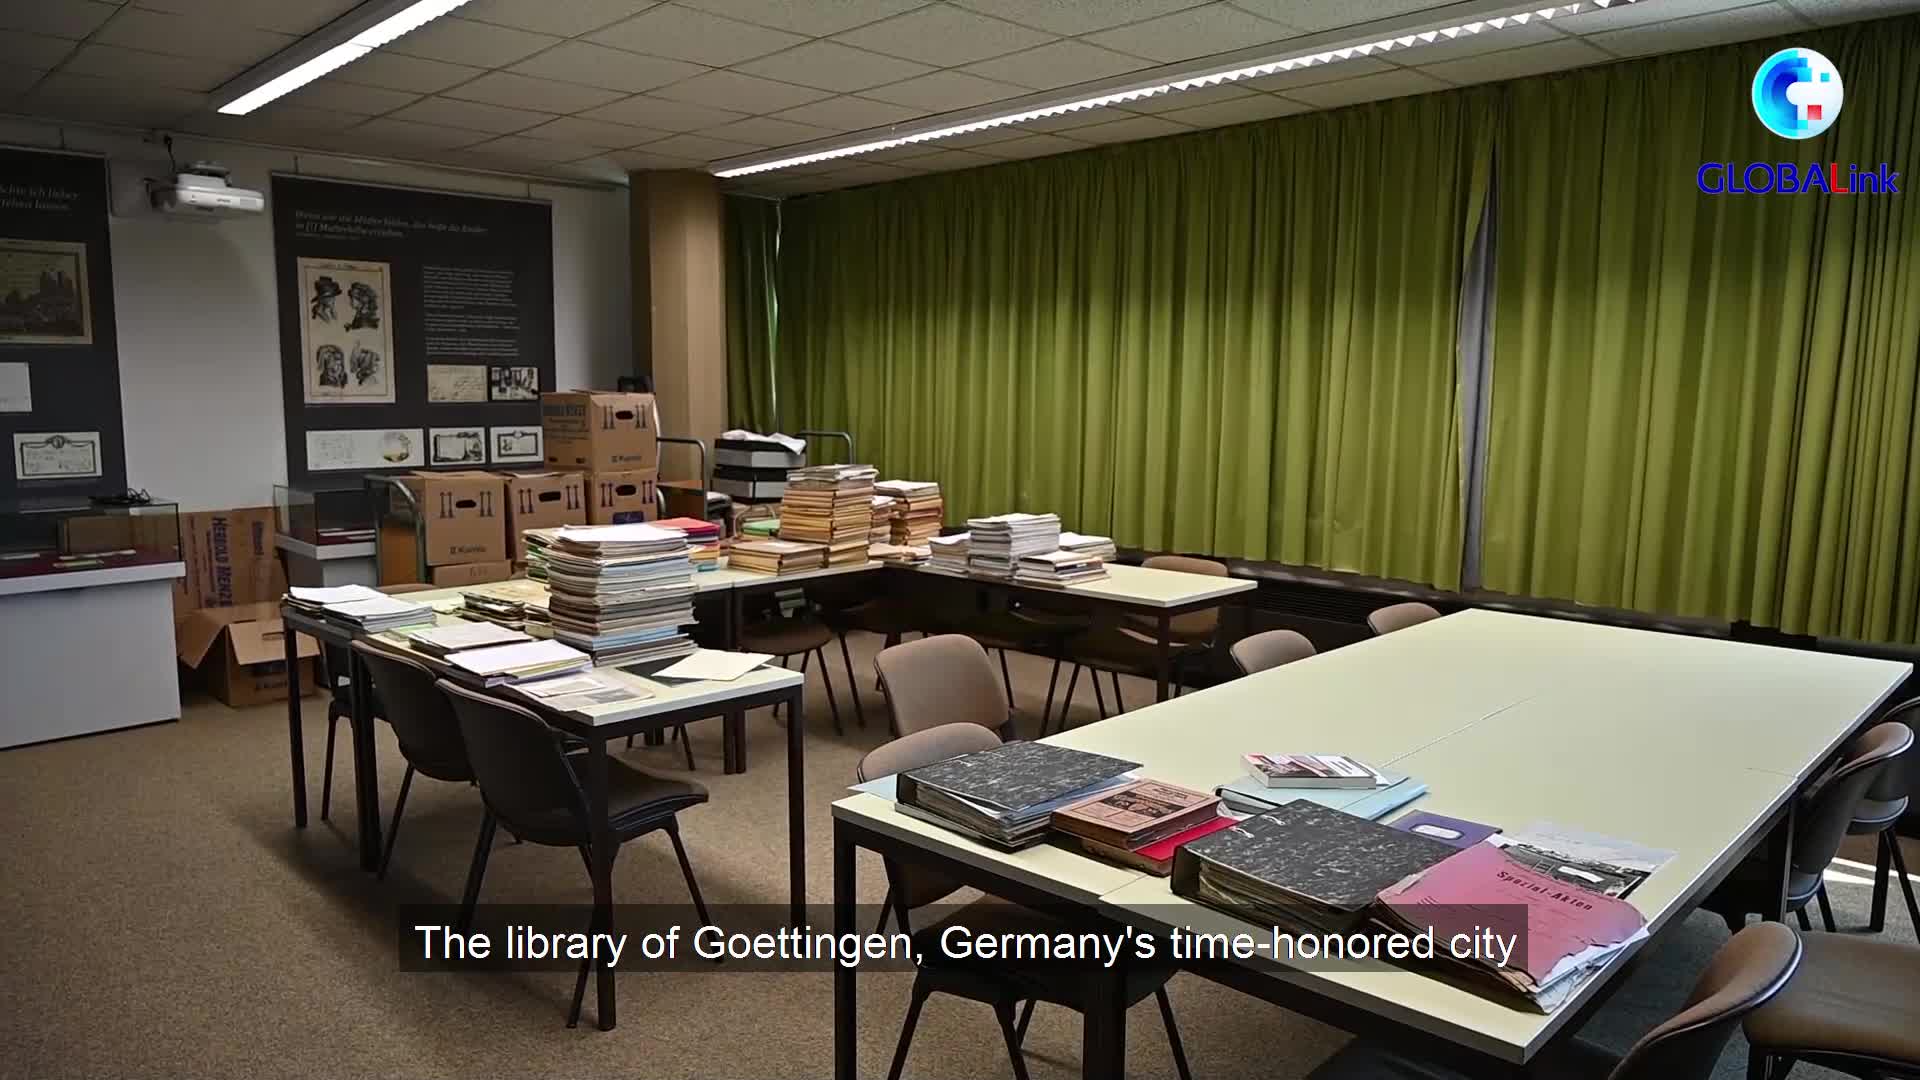 GLOBALink | Goettingen, Germany: Temporary home to future top marshal of Chinese army